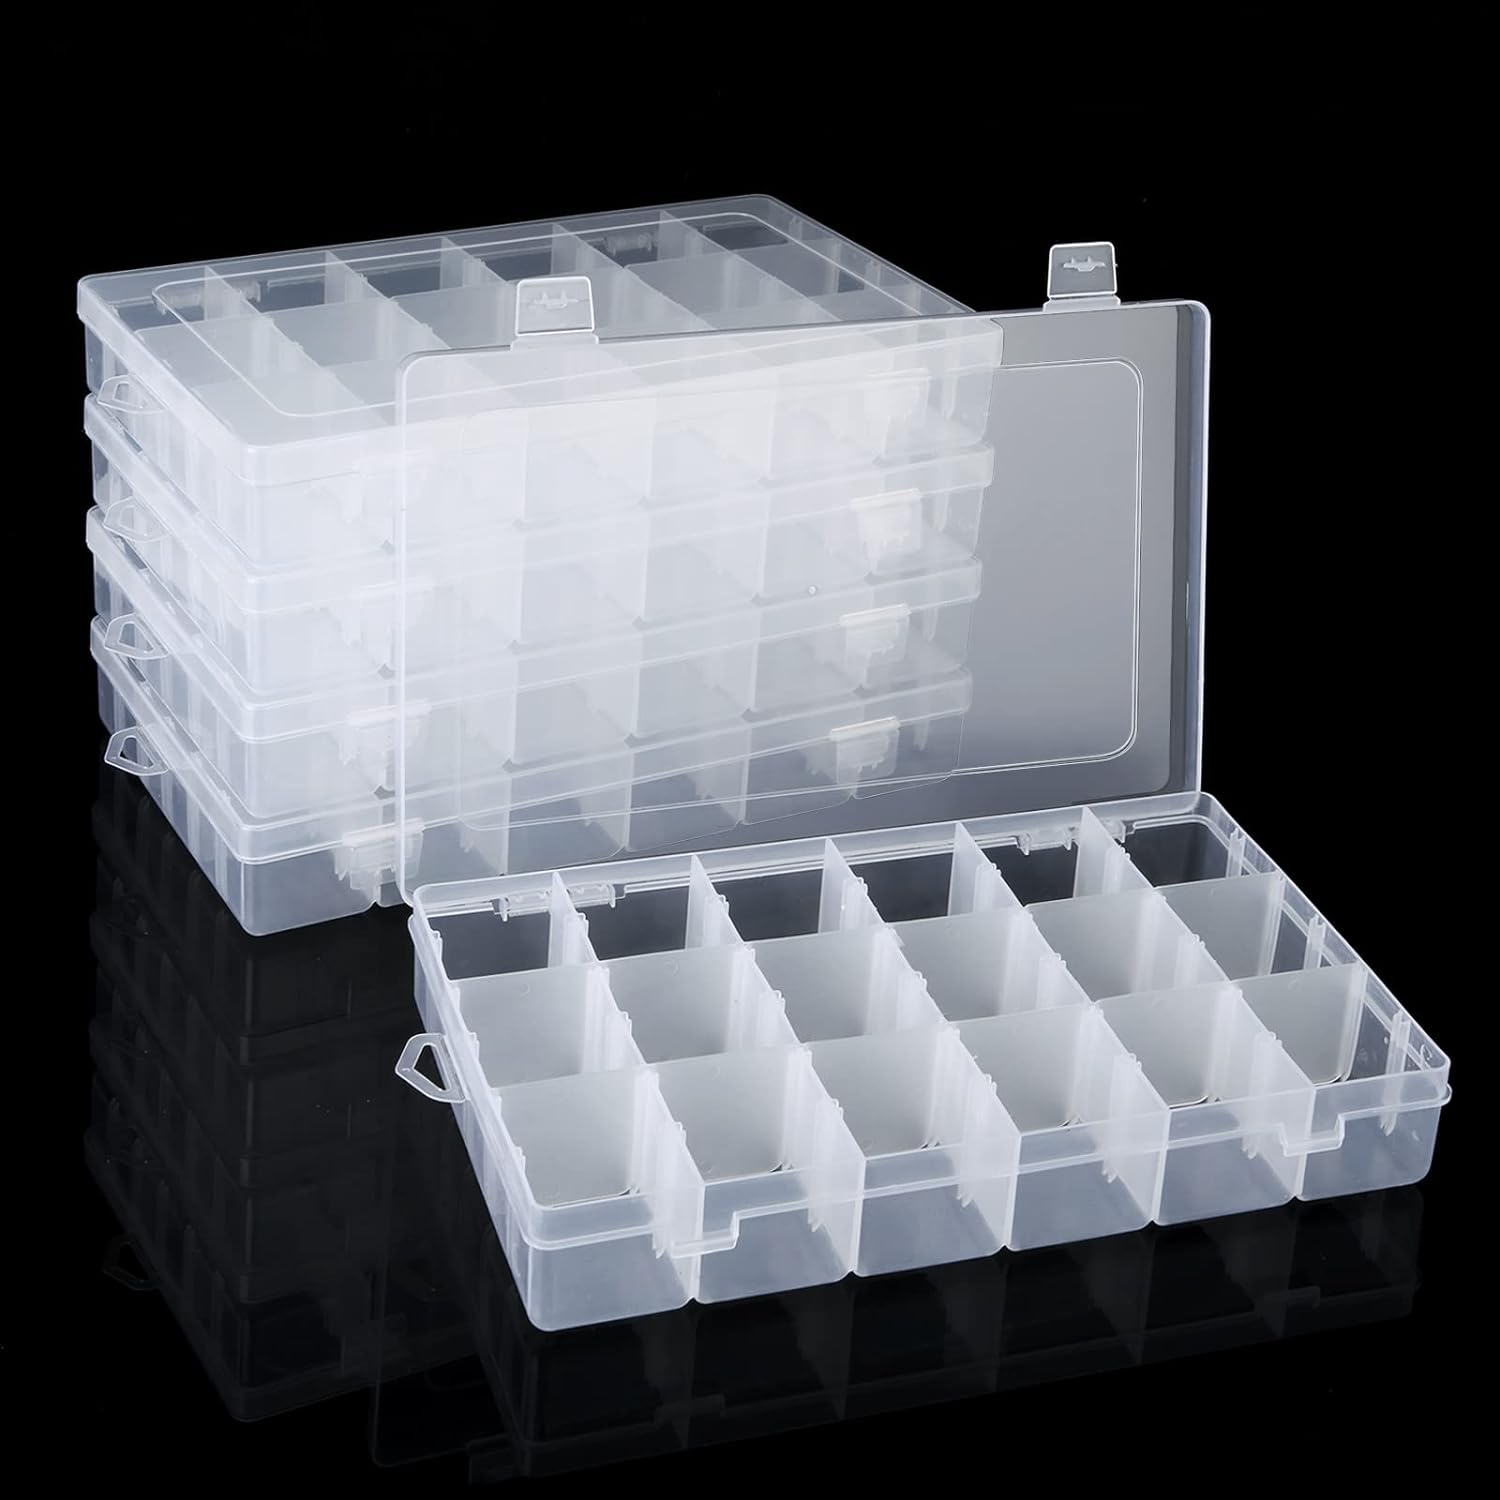  UHOUSE Plastic Organizer Container with Adjustable